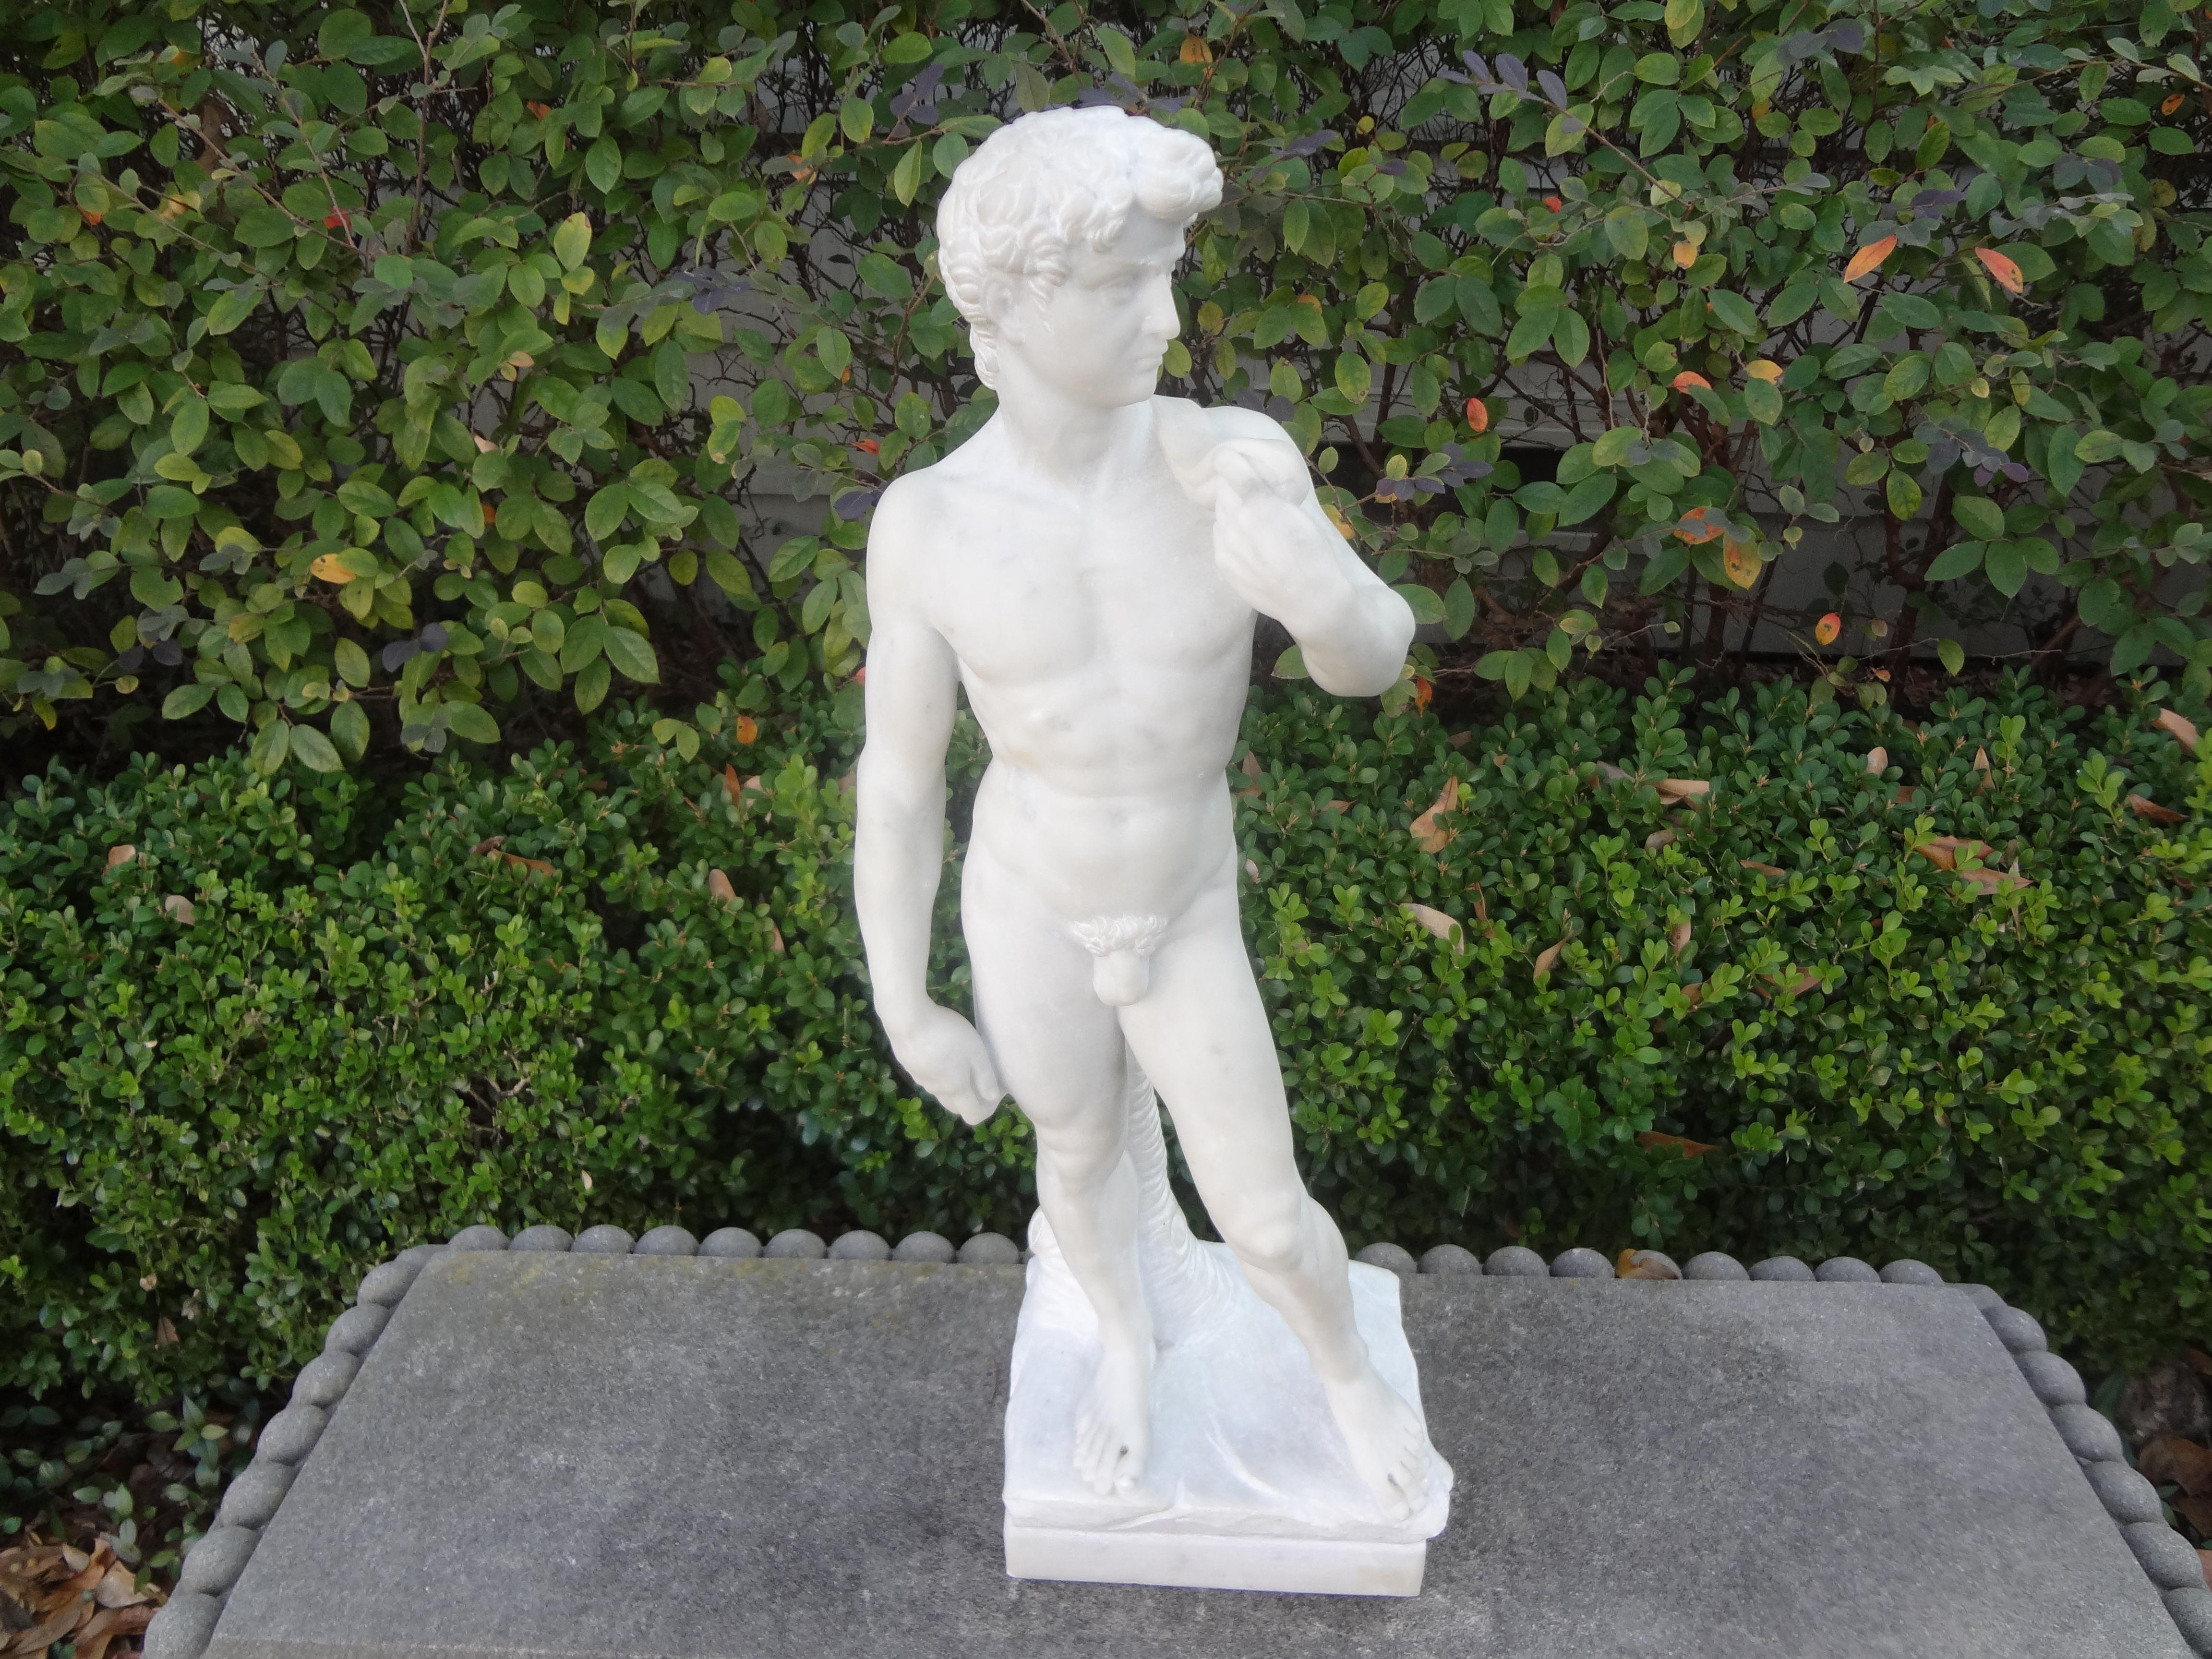 Stunning vintage Italian carved carrara marble sculpture or statue of David.
Offered is a good sized well executed marble figure of David as a youth, copied from the original by Michelangelo at the Galleria dell'Accademia, Florence, Italy.
The